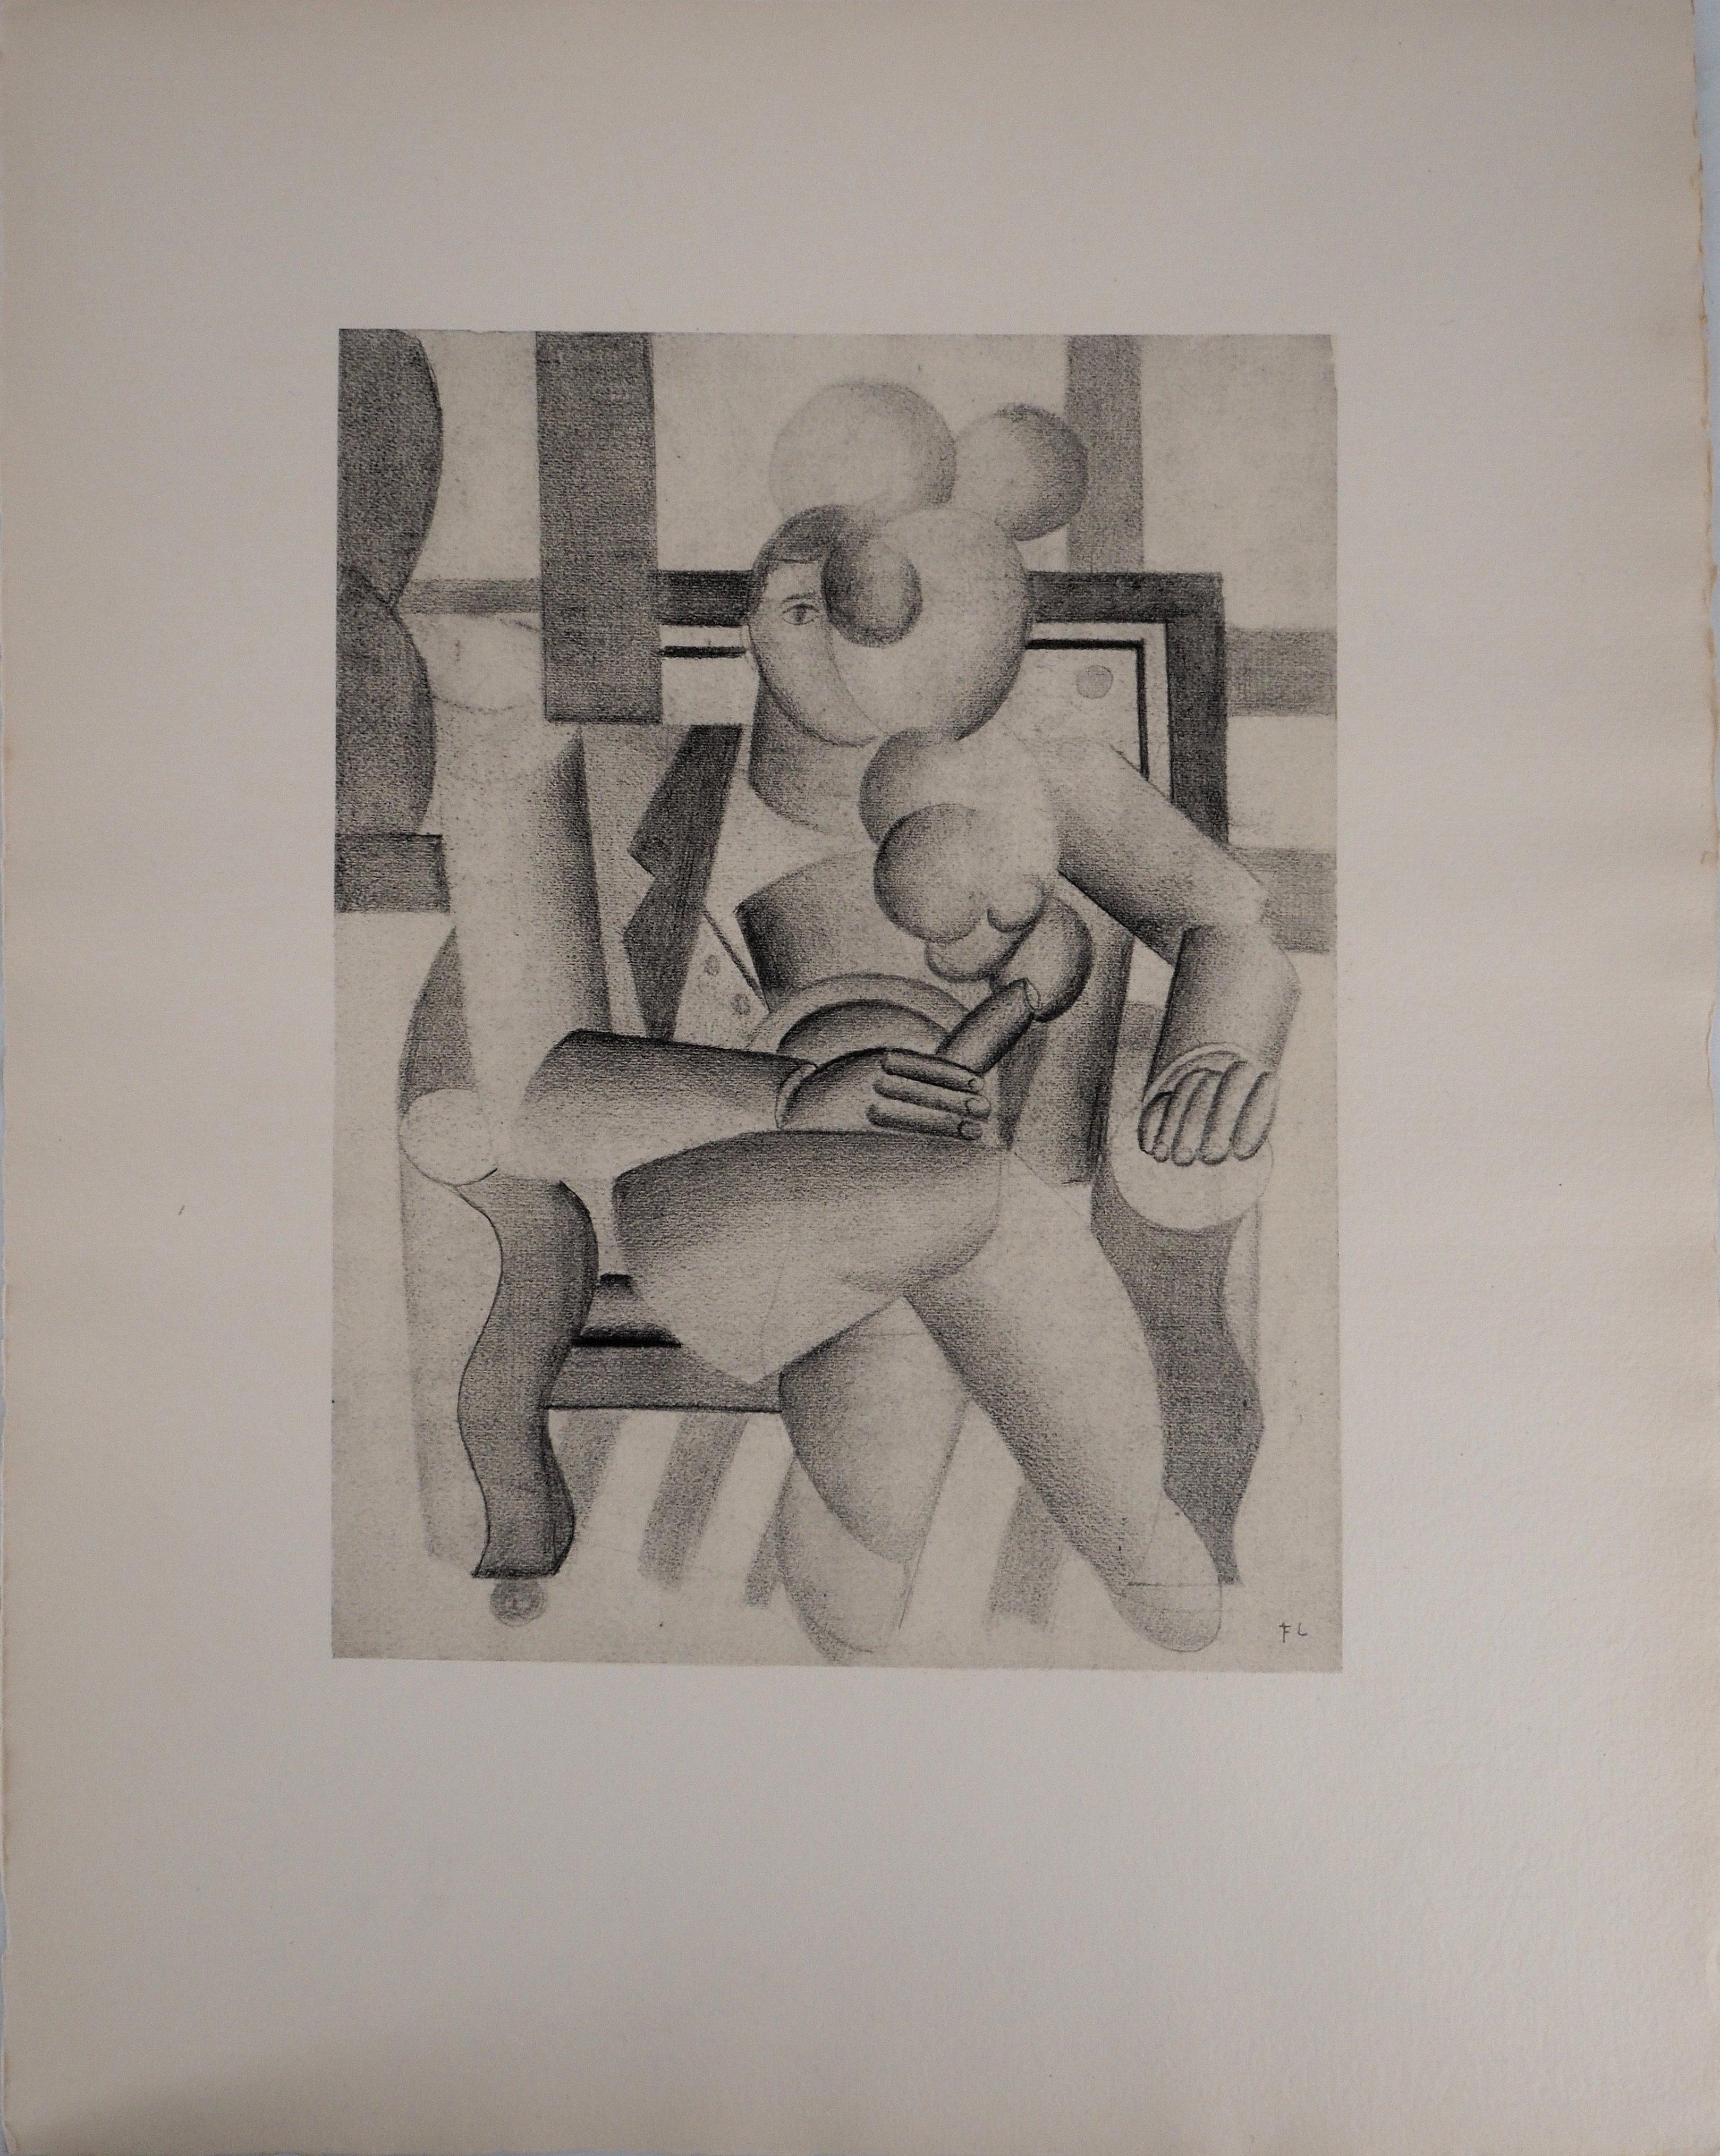 Fernand LÉGER 
Cubist Smoking Man with a Cigar, 1959

Original lithograph and stencil 
Printed signature in the plate
On vellum Auvergne 50,2 x 40 cm (c. 19,7 x 15,7 Inches)
Published in 1959, under the control of the wife of  the artist, Nadia